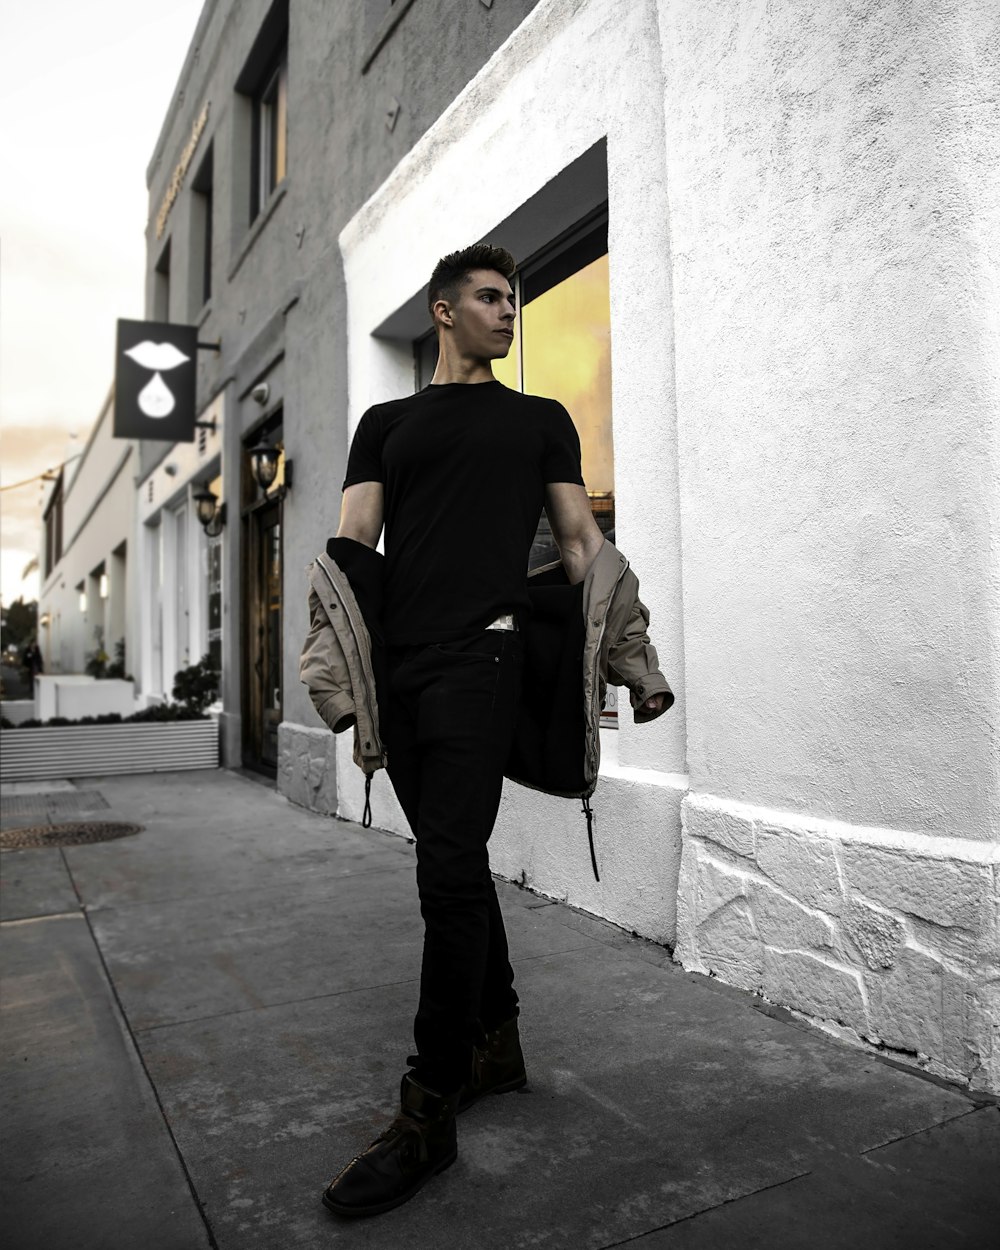 Man in black shirt and gray pants leaning on wall photo – Free Apparel  Image on Unsplash